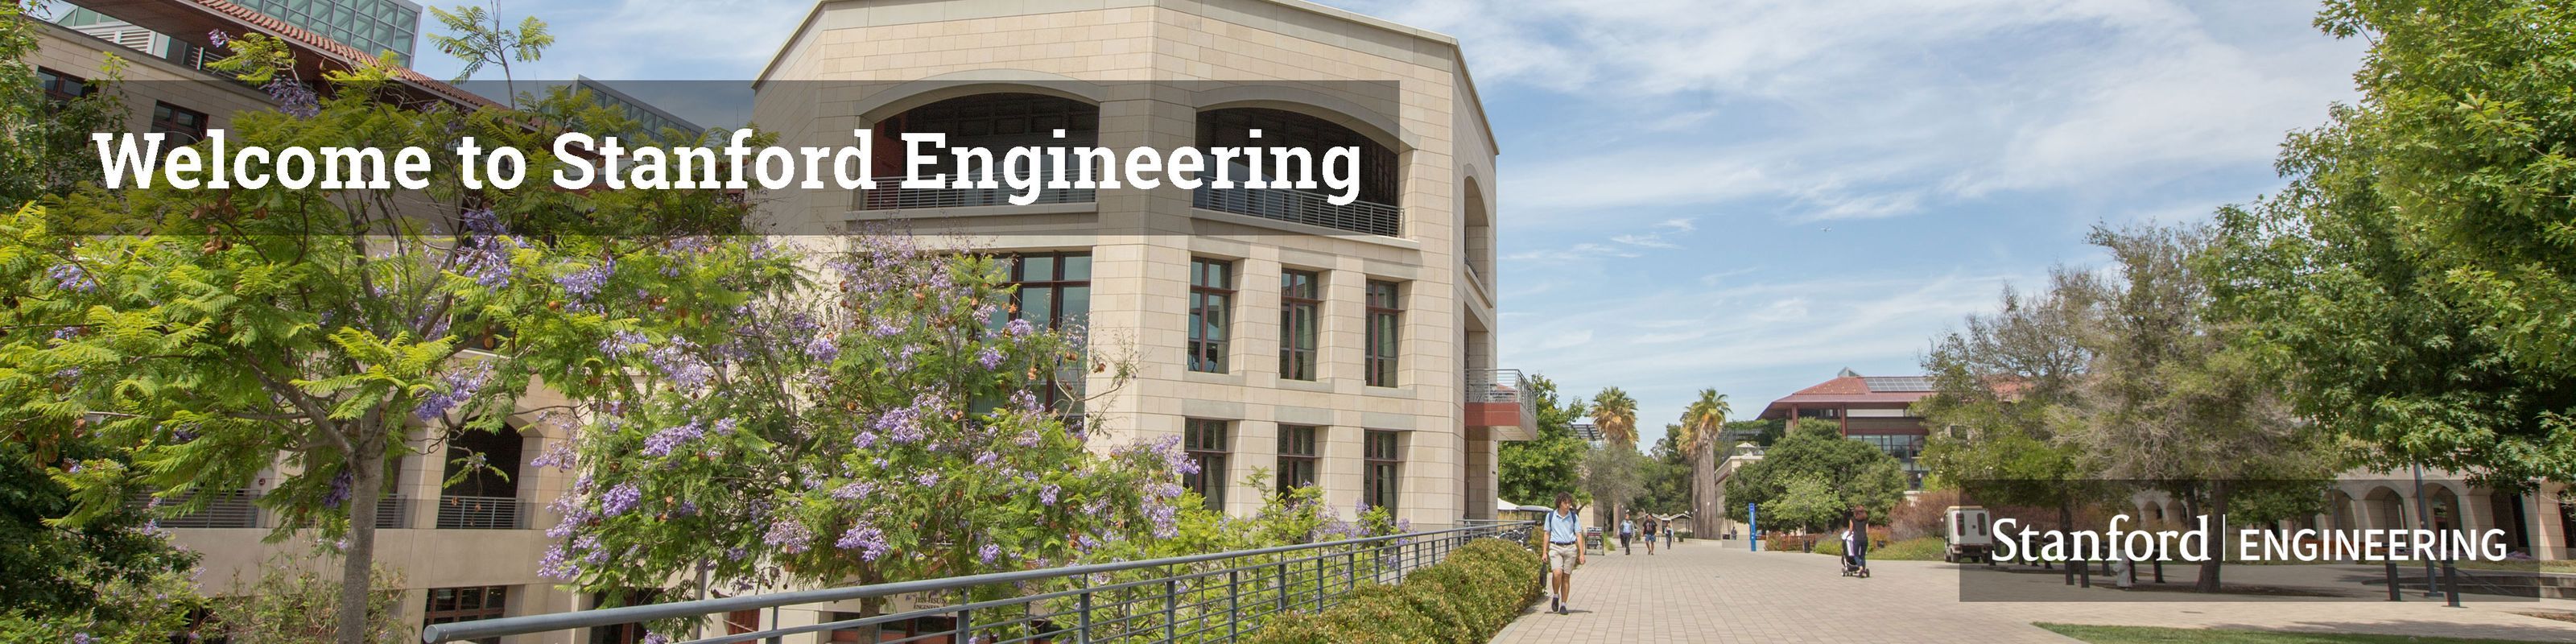 Stanford Engineering First-Year Grad Students 2020